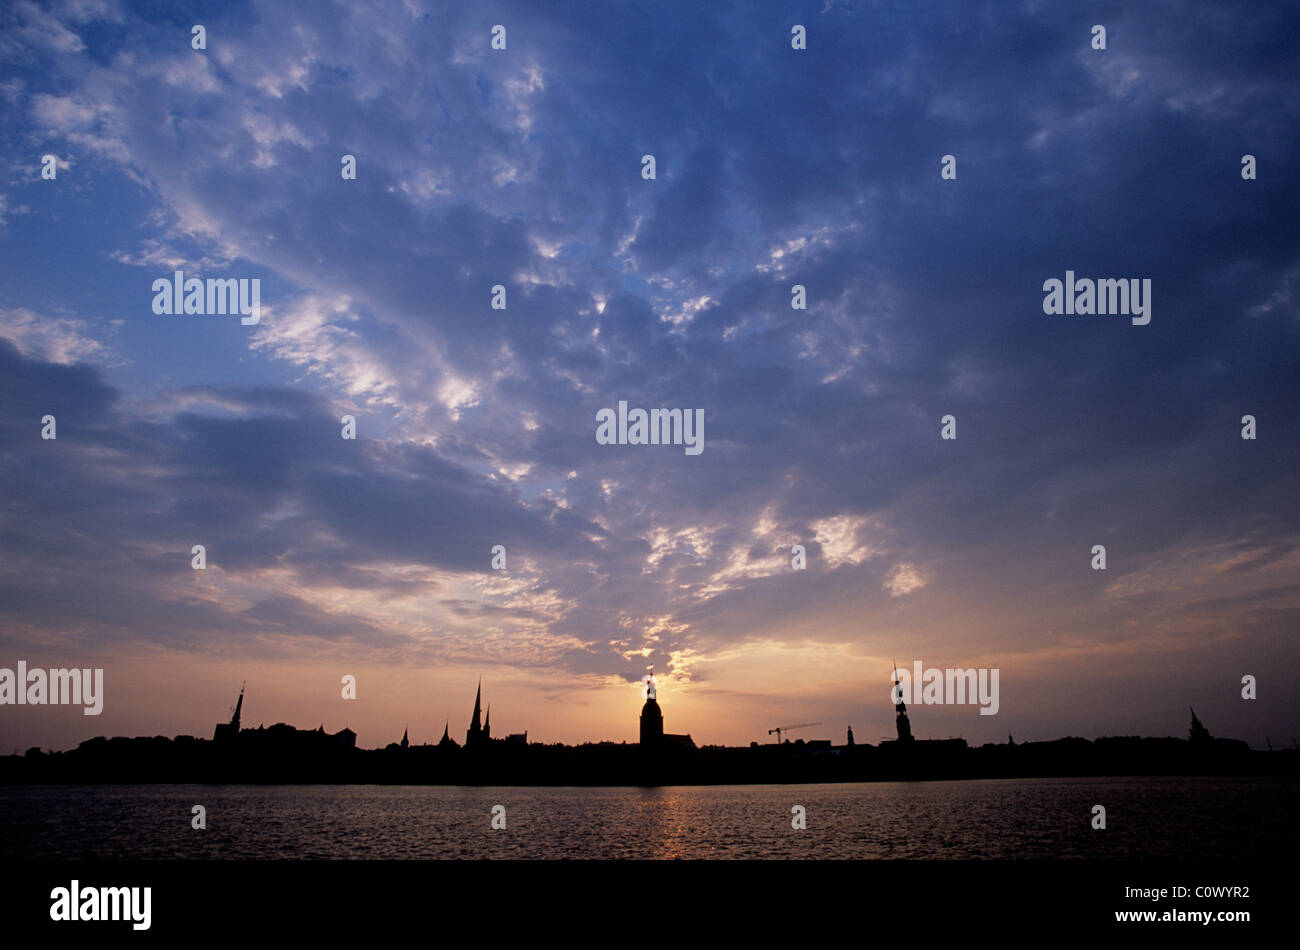 Riga the capital of Latvia, one of the Baltic States. Dawn rises over St Stephens Church on the banks of the Daugava River. Stock Photo